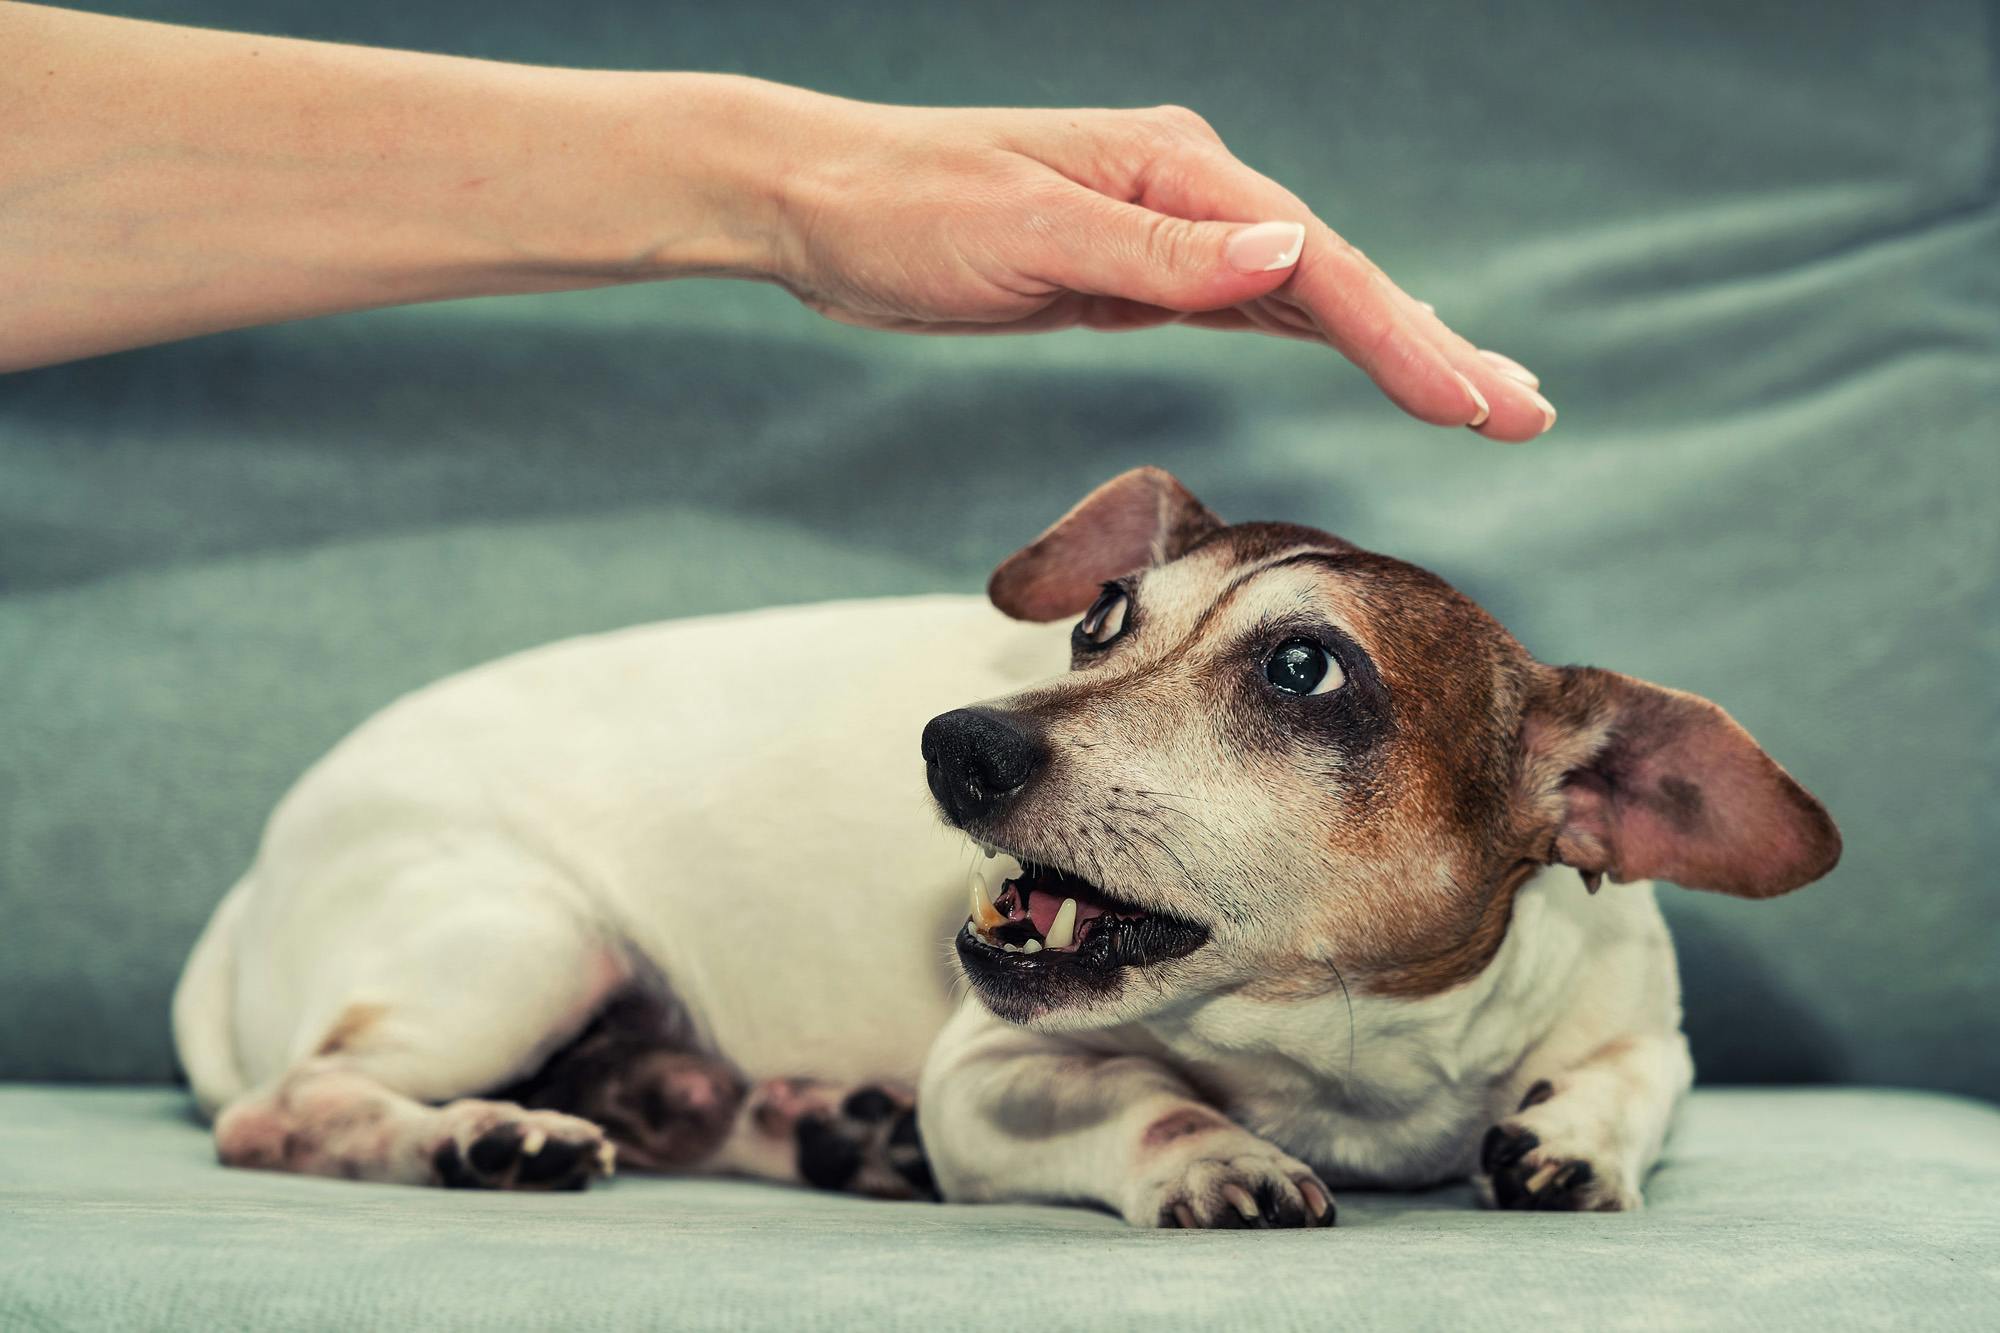 Fearful Jack Russell Terrier shows teeth as hand approaches over top of the head